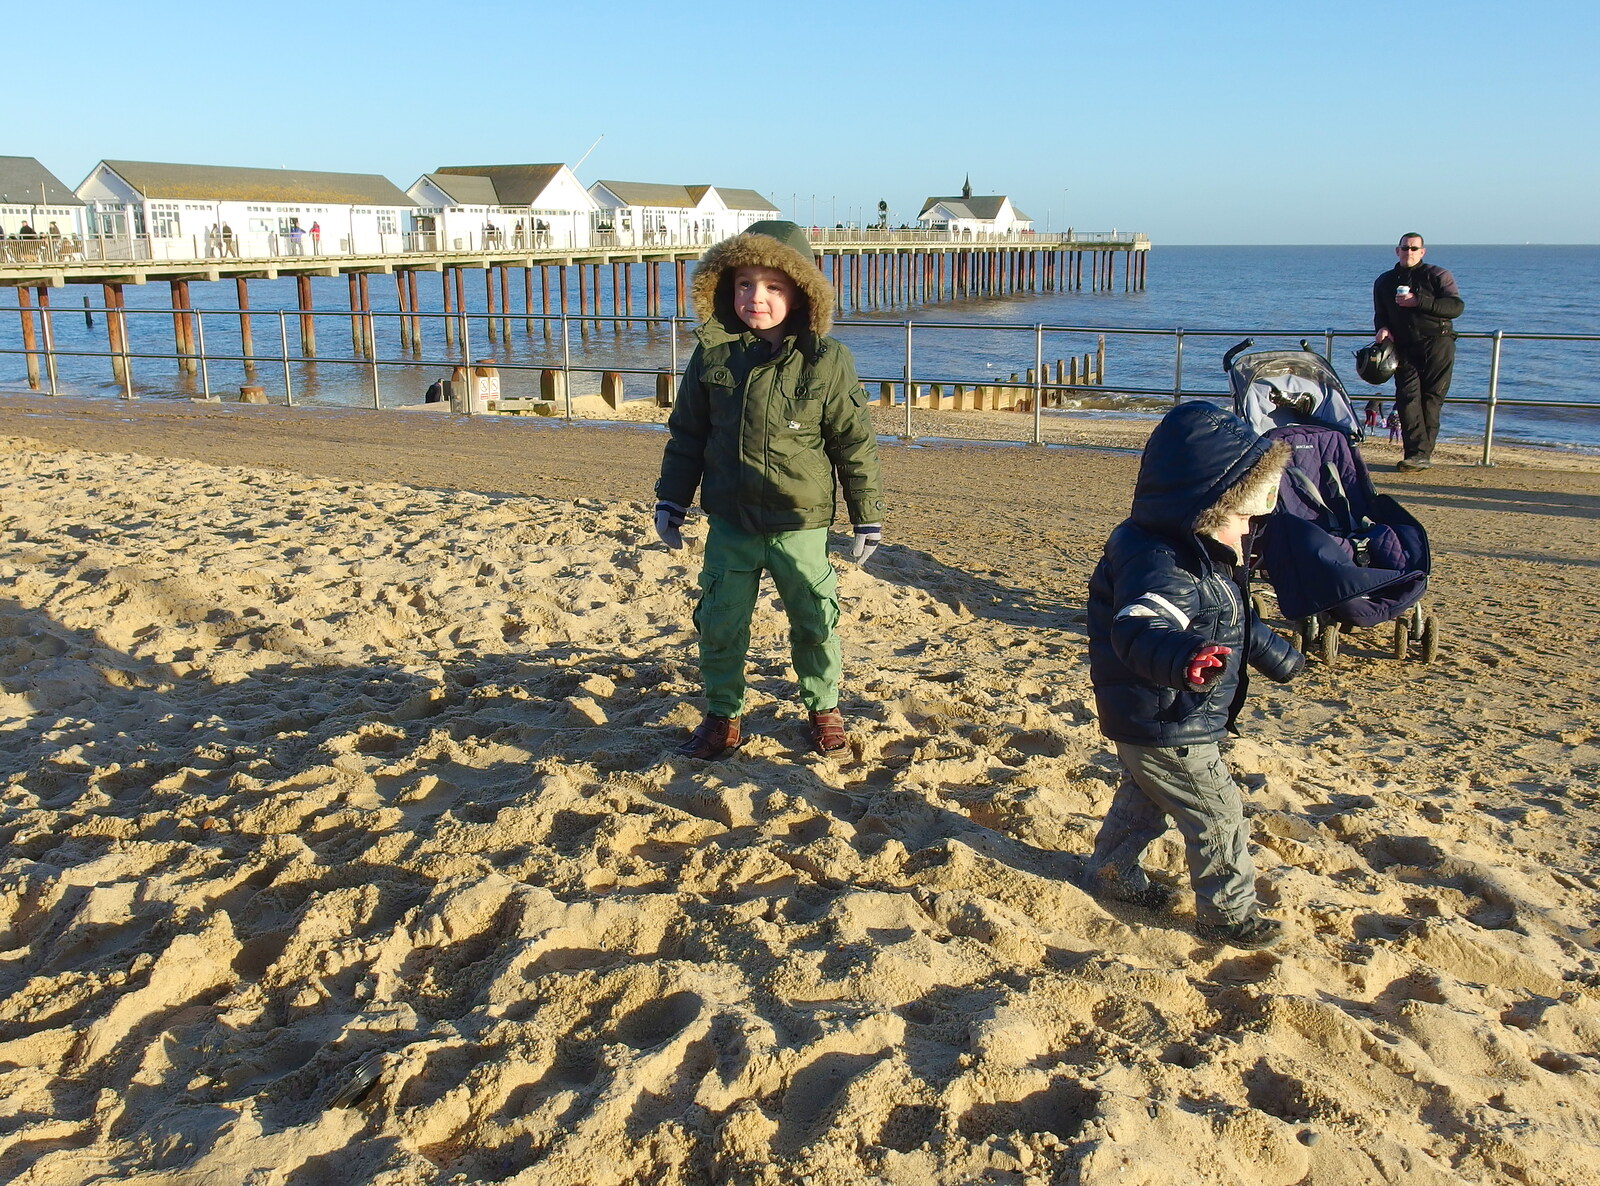 Fred and Harry roam around on the sand pile from Post-Christmas Southwold, Suffolk - 29th December 2013